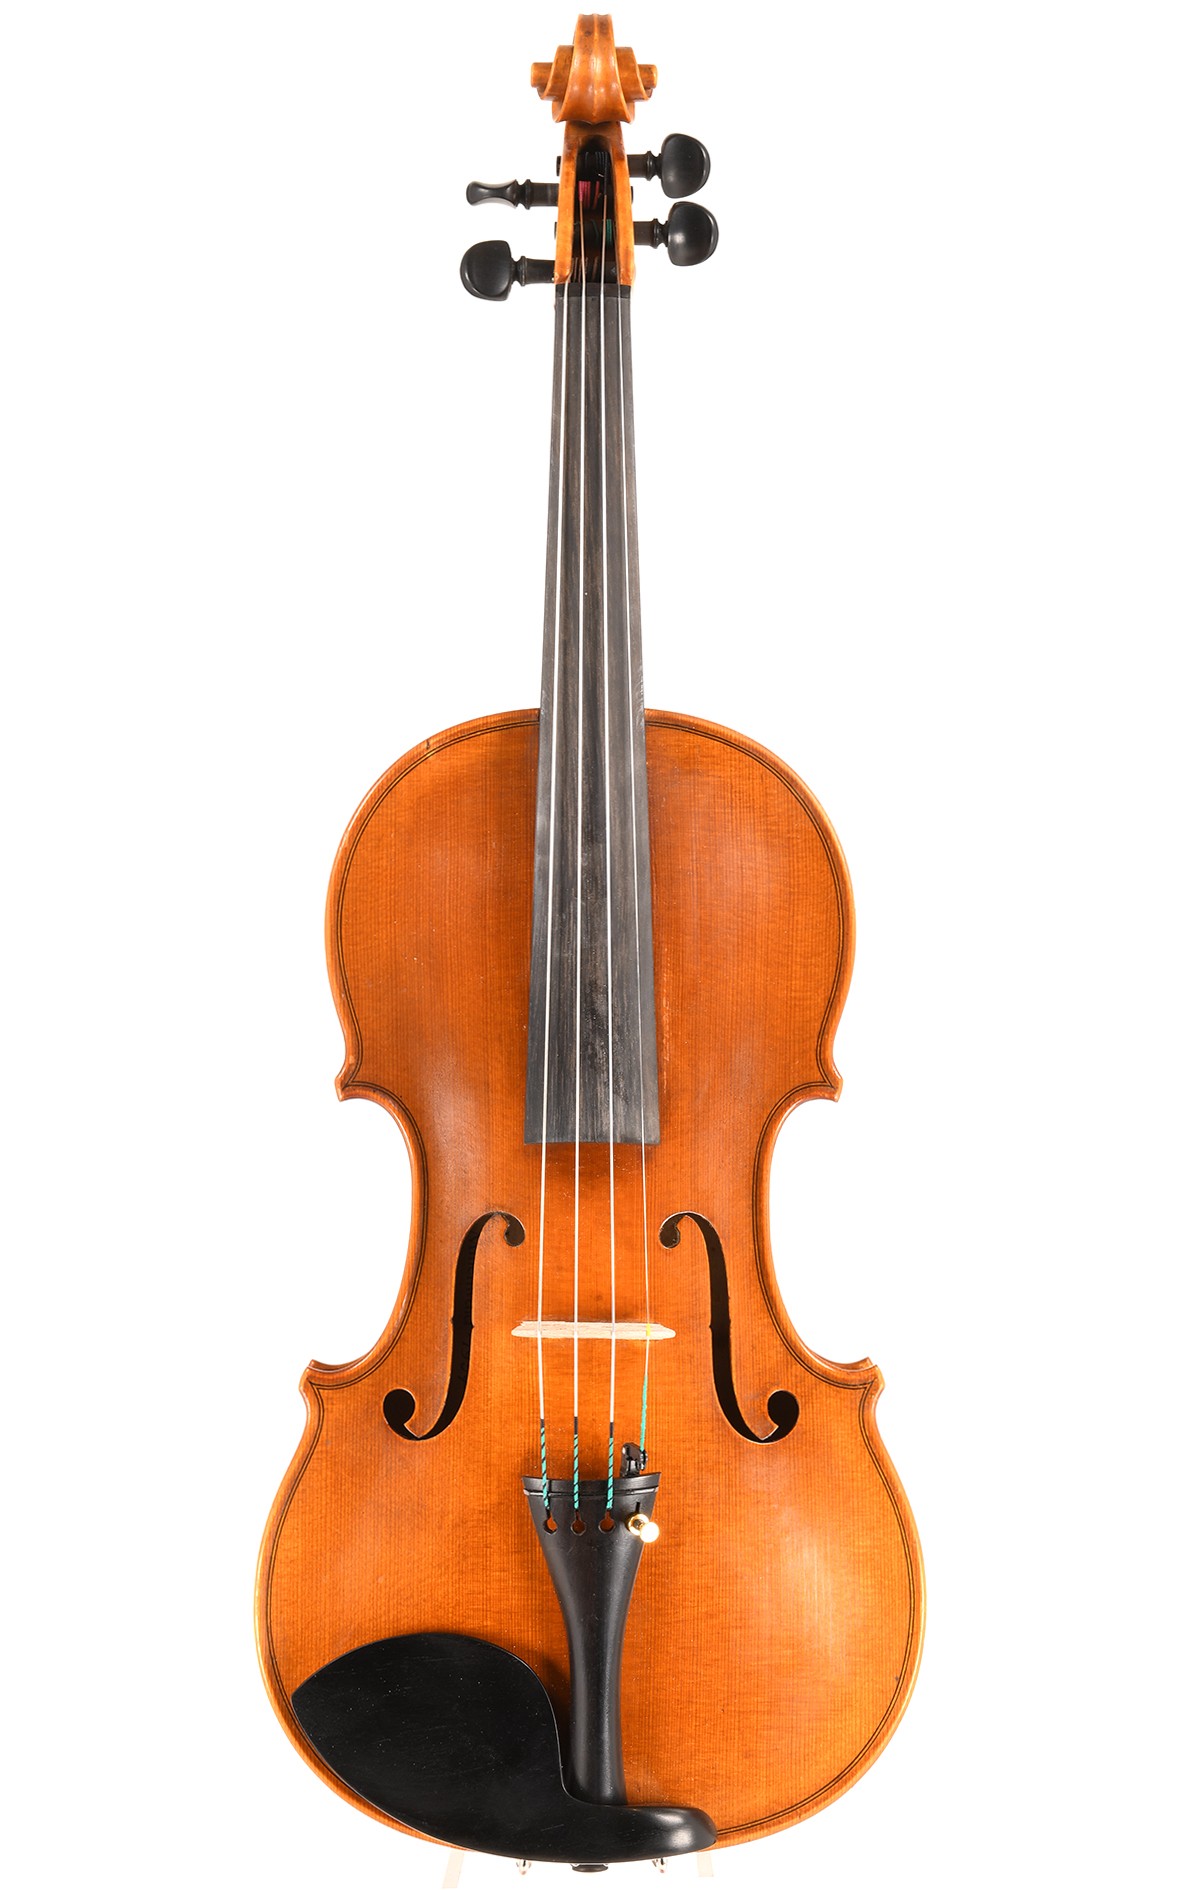 Ludwig Aschauer master violin from Mittenwald